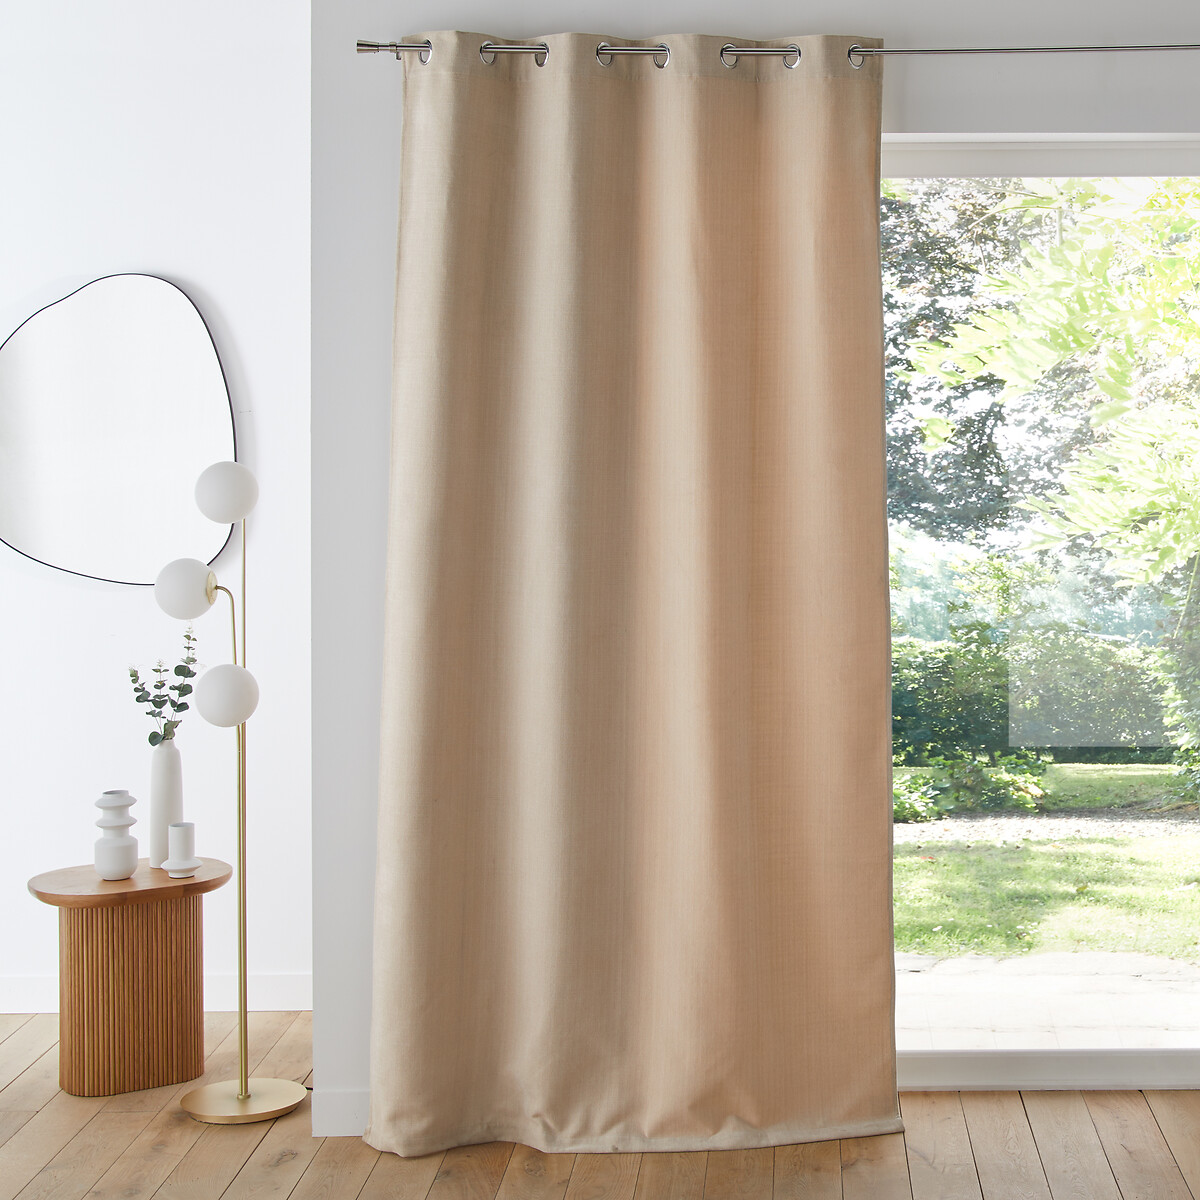 Classic Chenille Plain Woven Lined Stylish Ready Made Eyelet Ring Top Curtains 